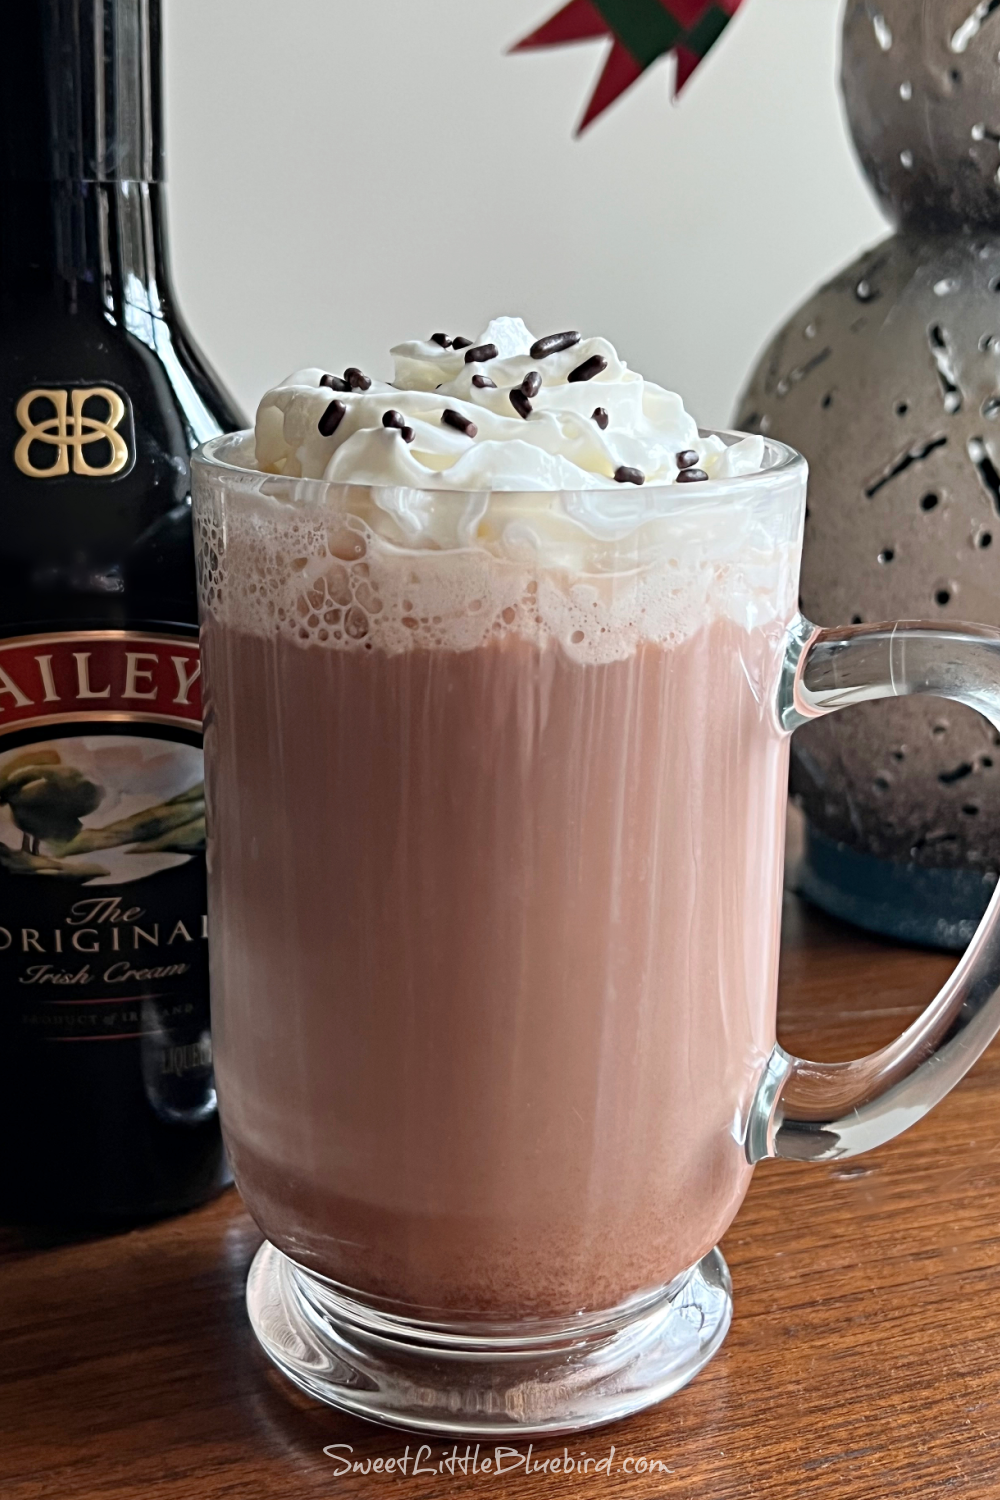 This photo shows a Dirty Snowman cocktail served in a clear mug glass, topped with whipped cream and chocolate sprinkles.